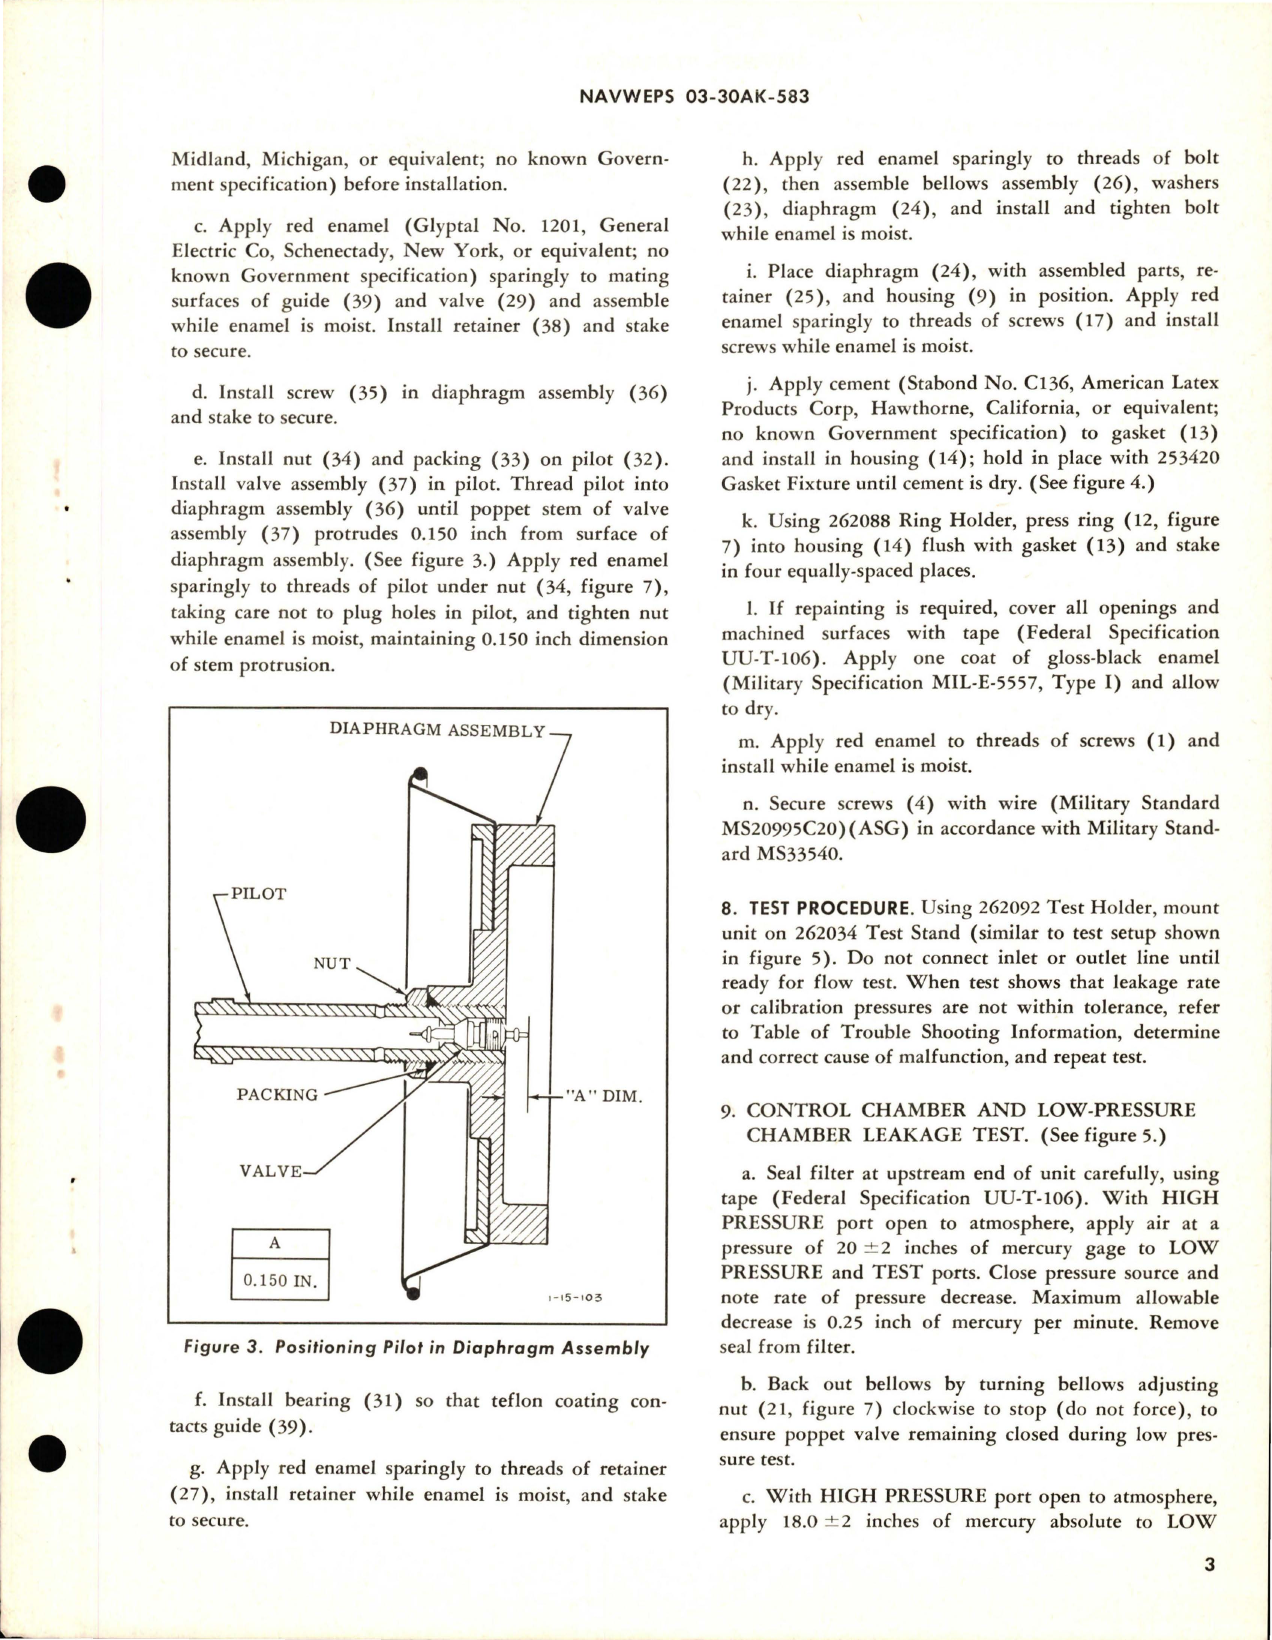 Sample page 5 from AirCorps Library document: Overhaul Instructions with Parts Breakdown for Pressure Ratio Control and Shutoff Valve - Part 93860-1